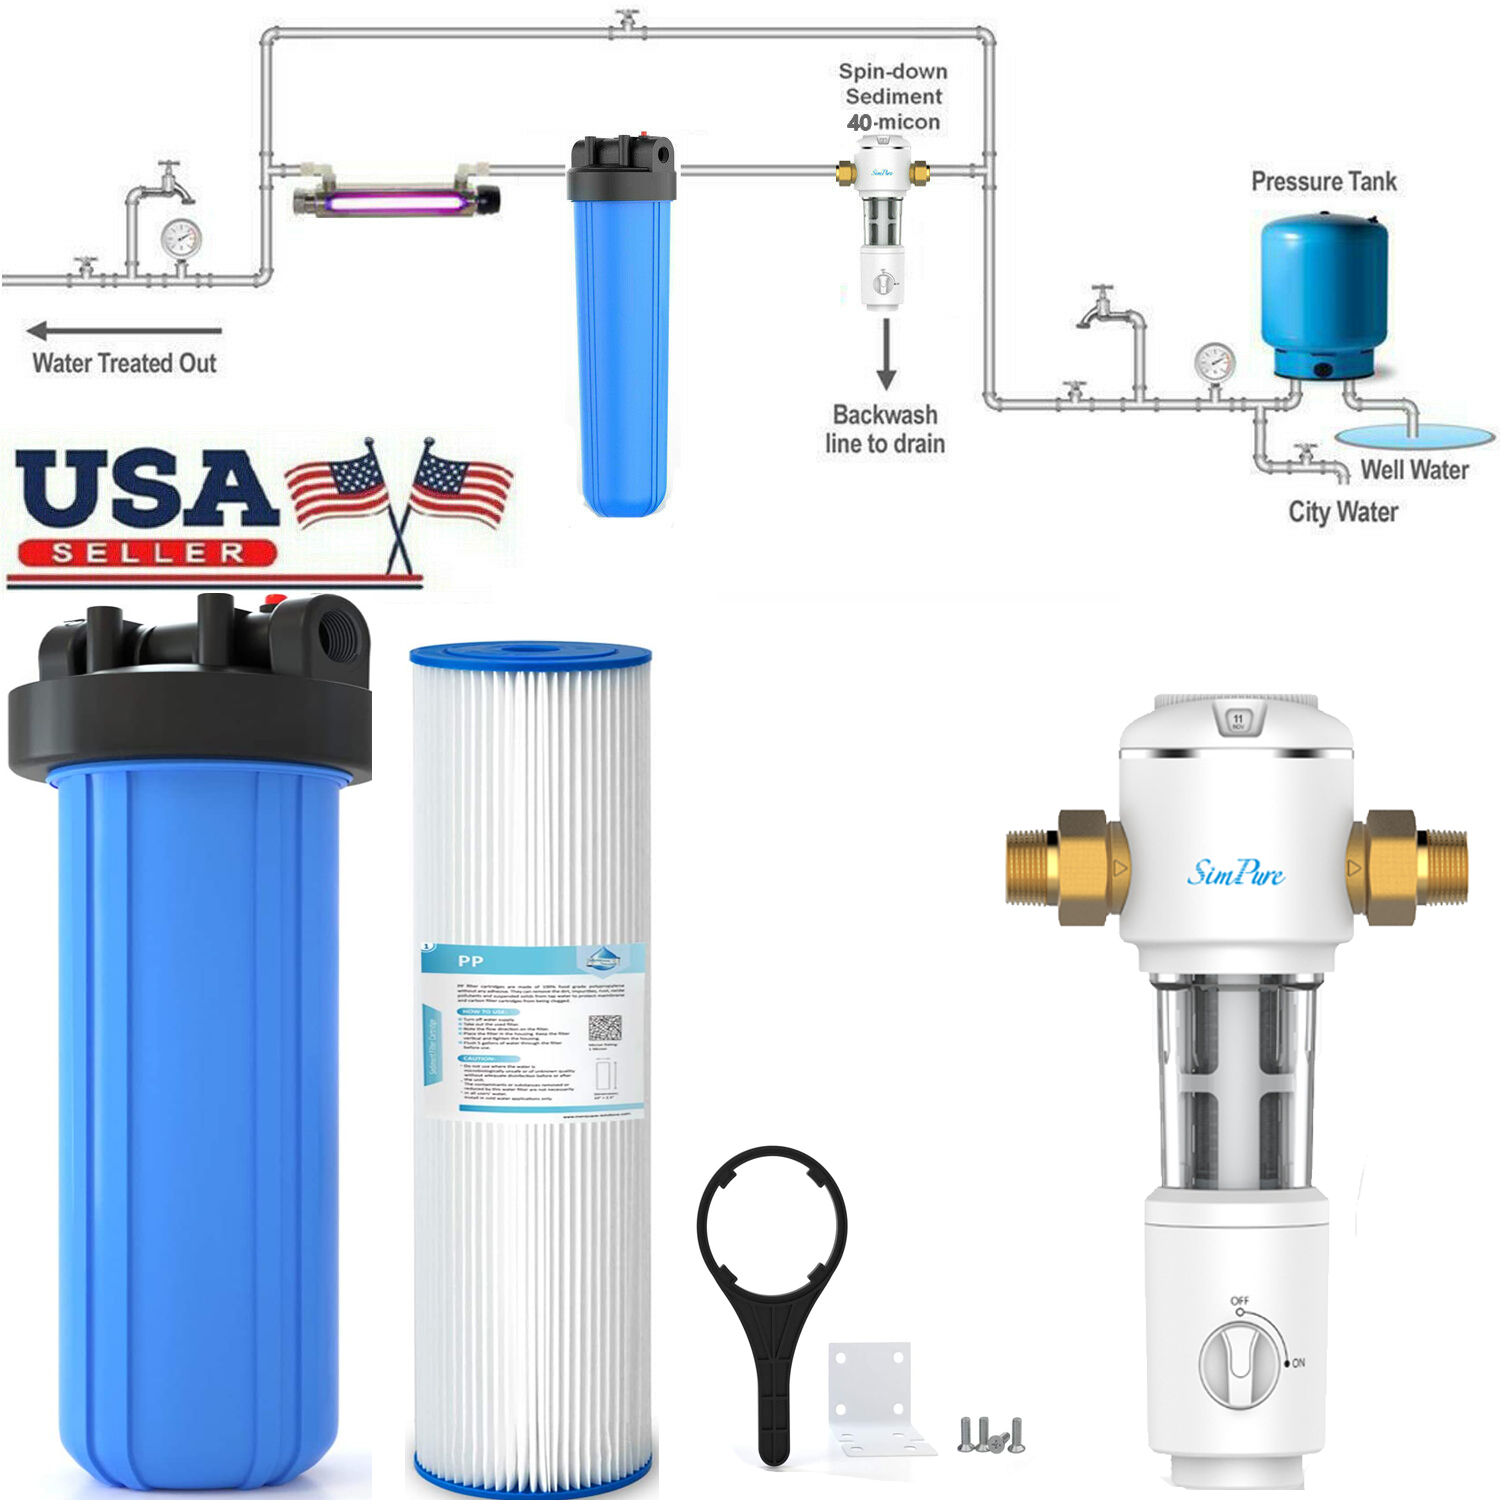 BIG BLUE 20" WATER FILTER SYSTEM 1" WITH FILTERS-TRIPLE WHOLE HOUSE/COMMERCIAL 